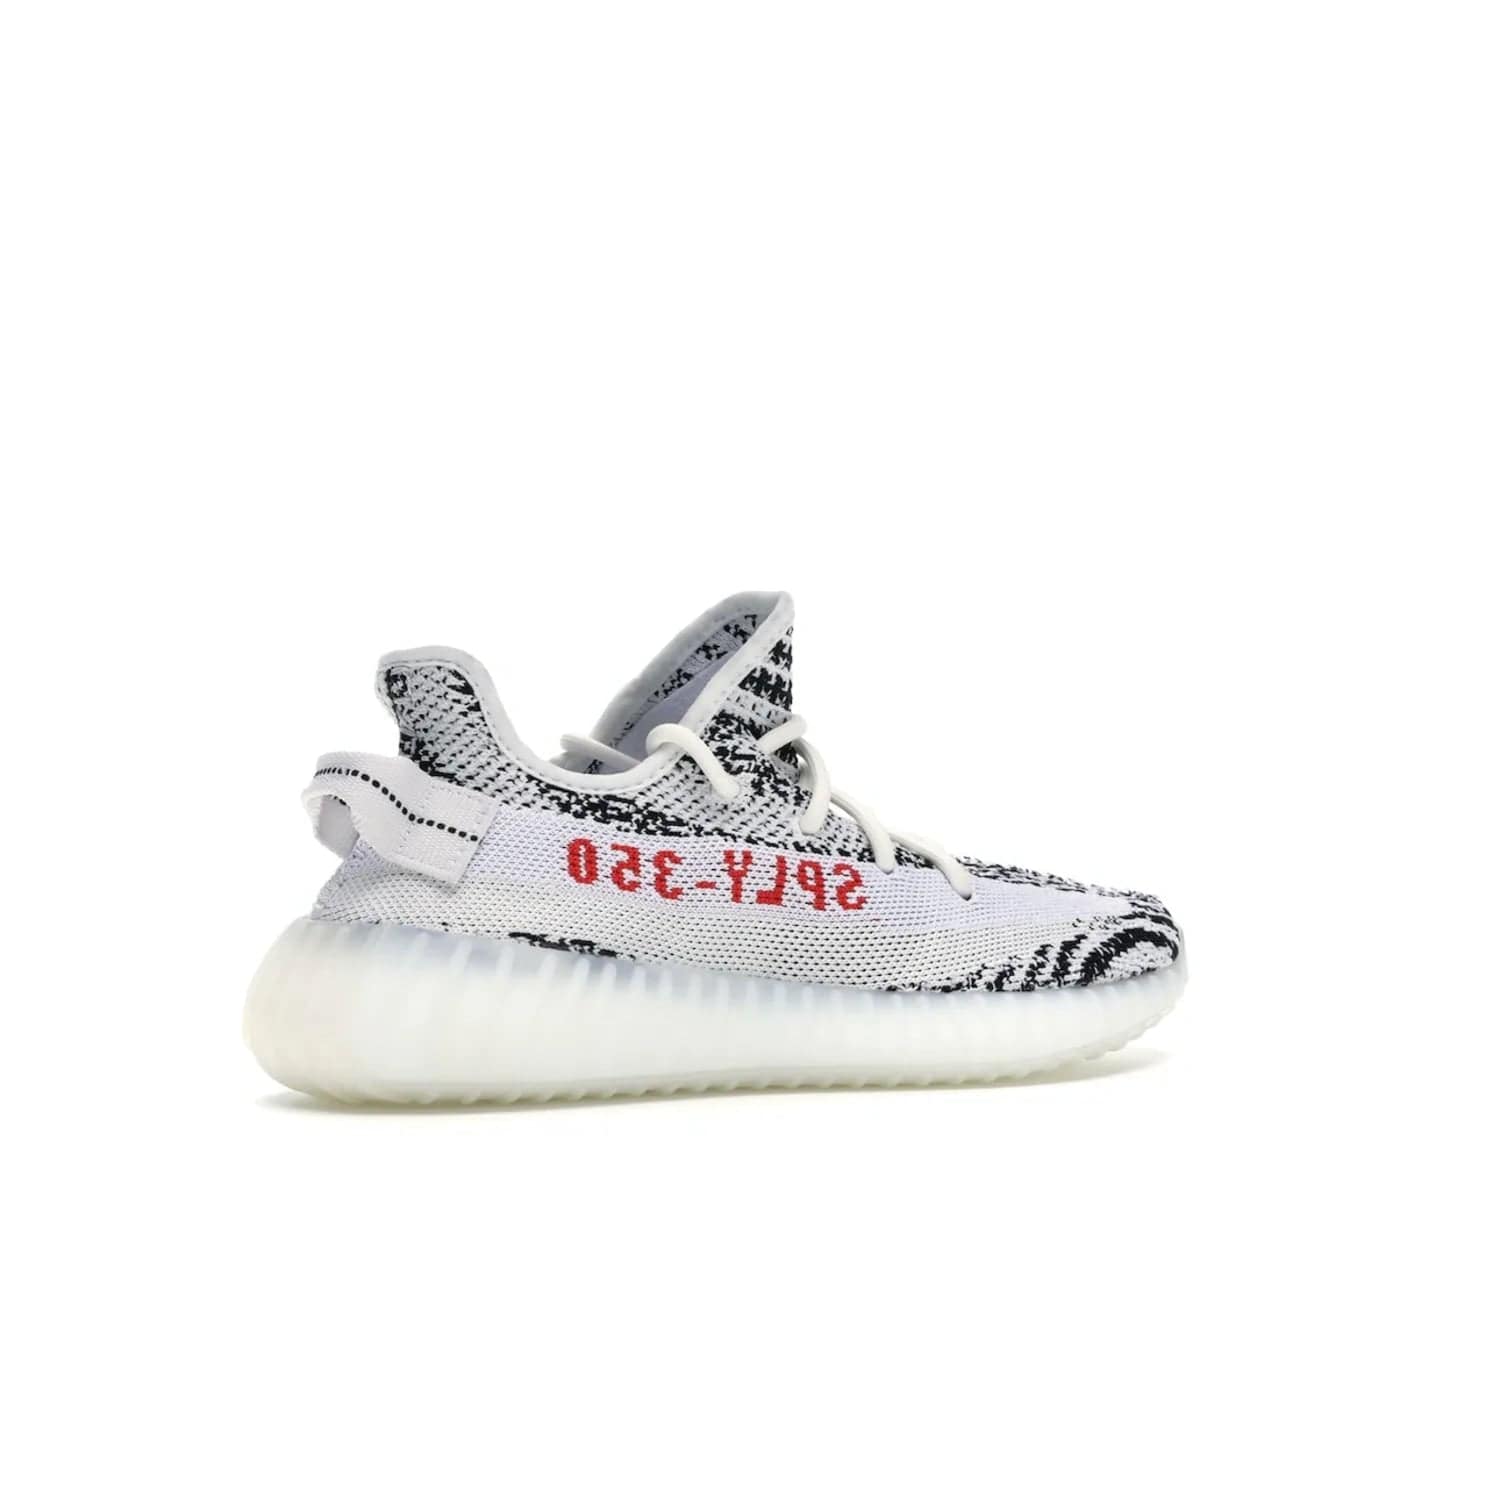 adidas Yeezy Boost 350 V2 Zebra - Image 34 - Only at www.BallersClubKickz.com - #
Score the iconic adidas Yeezy Boost 350 V2 Zebra for a fashionable addition to your street-style. Featuring a Primeknit upper and Boost sole, you'll look great and feel comfortable with every step.